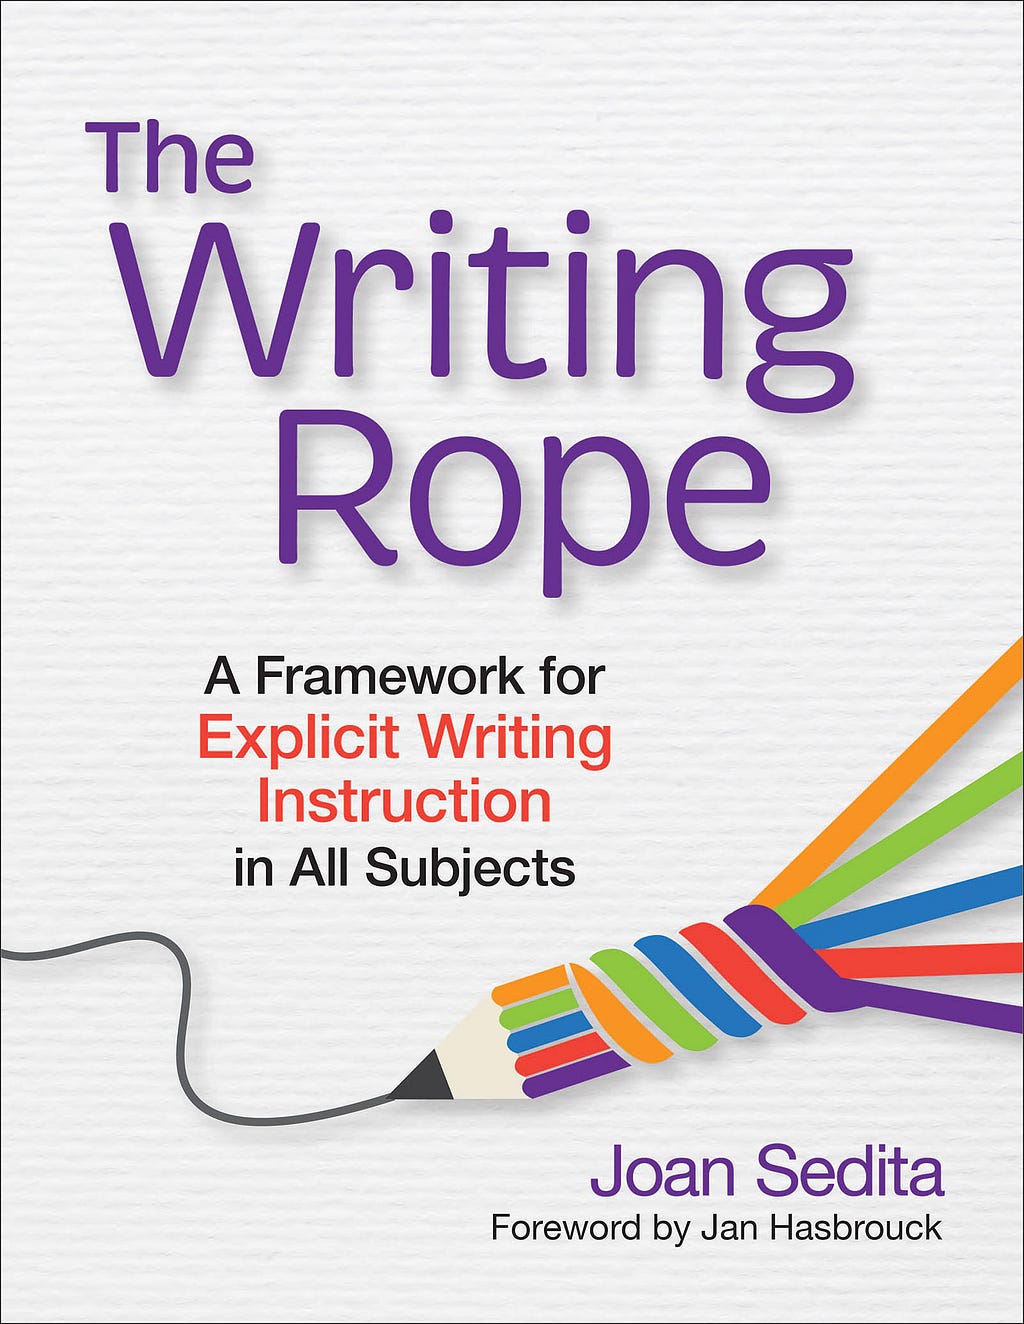 The Writing Rope: A Framework for Explicit Writing Instruction in All Subjects PDF